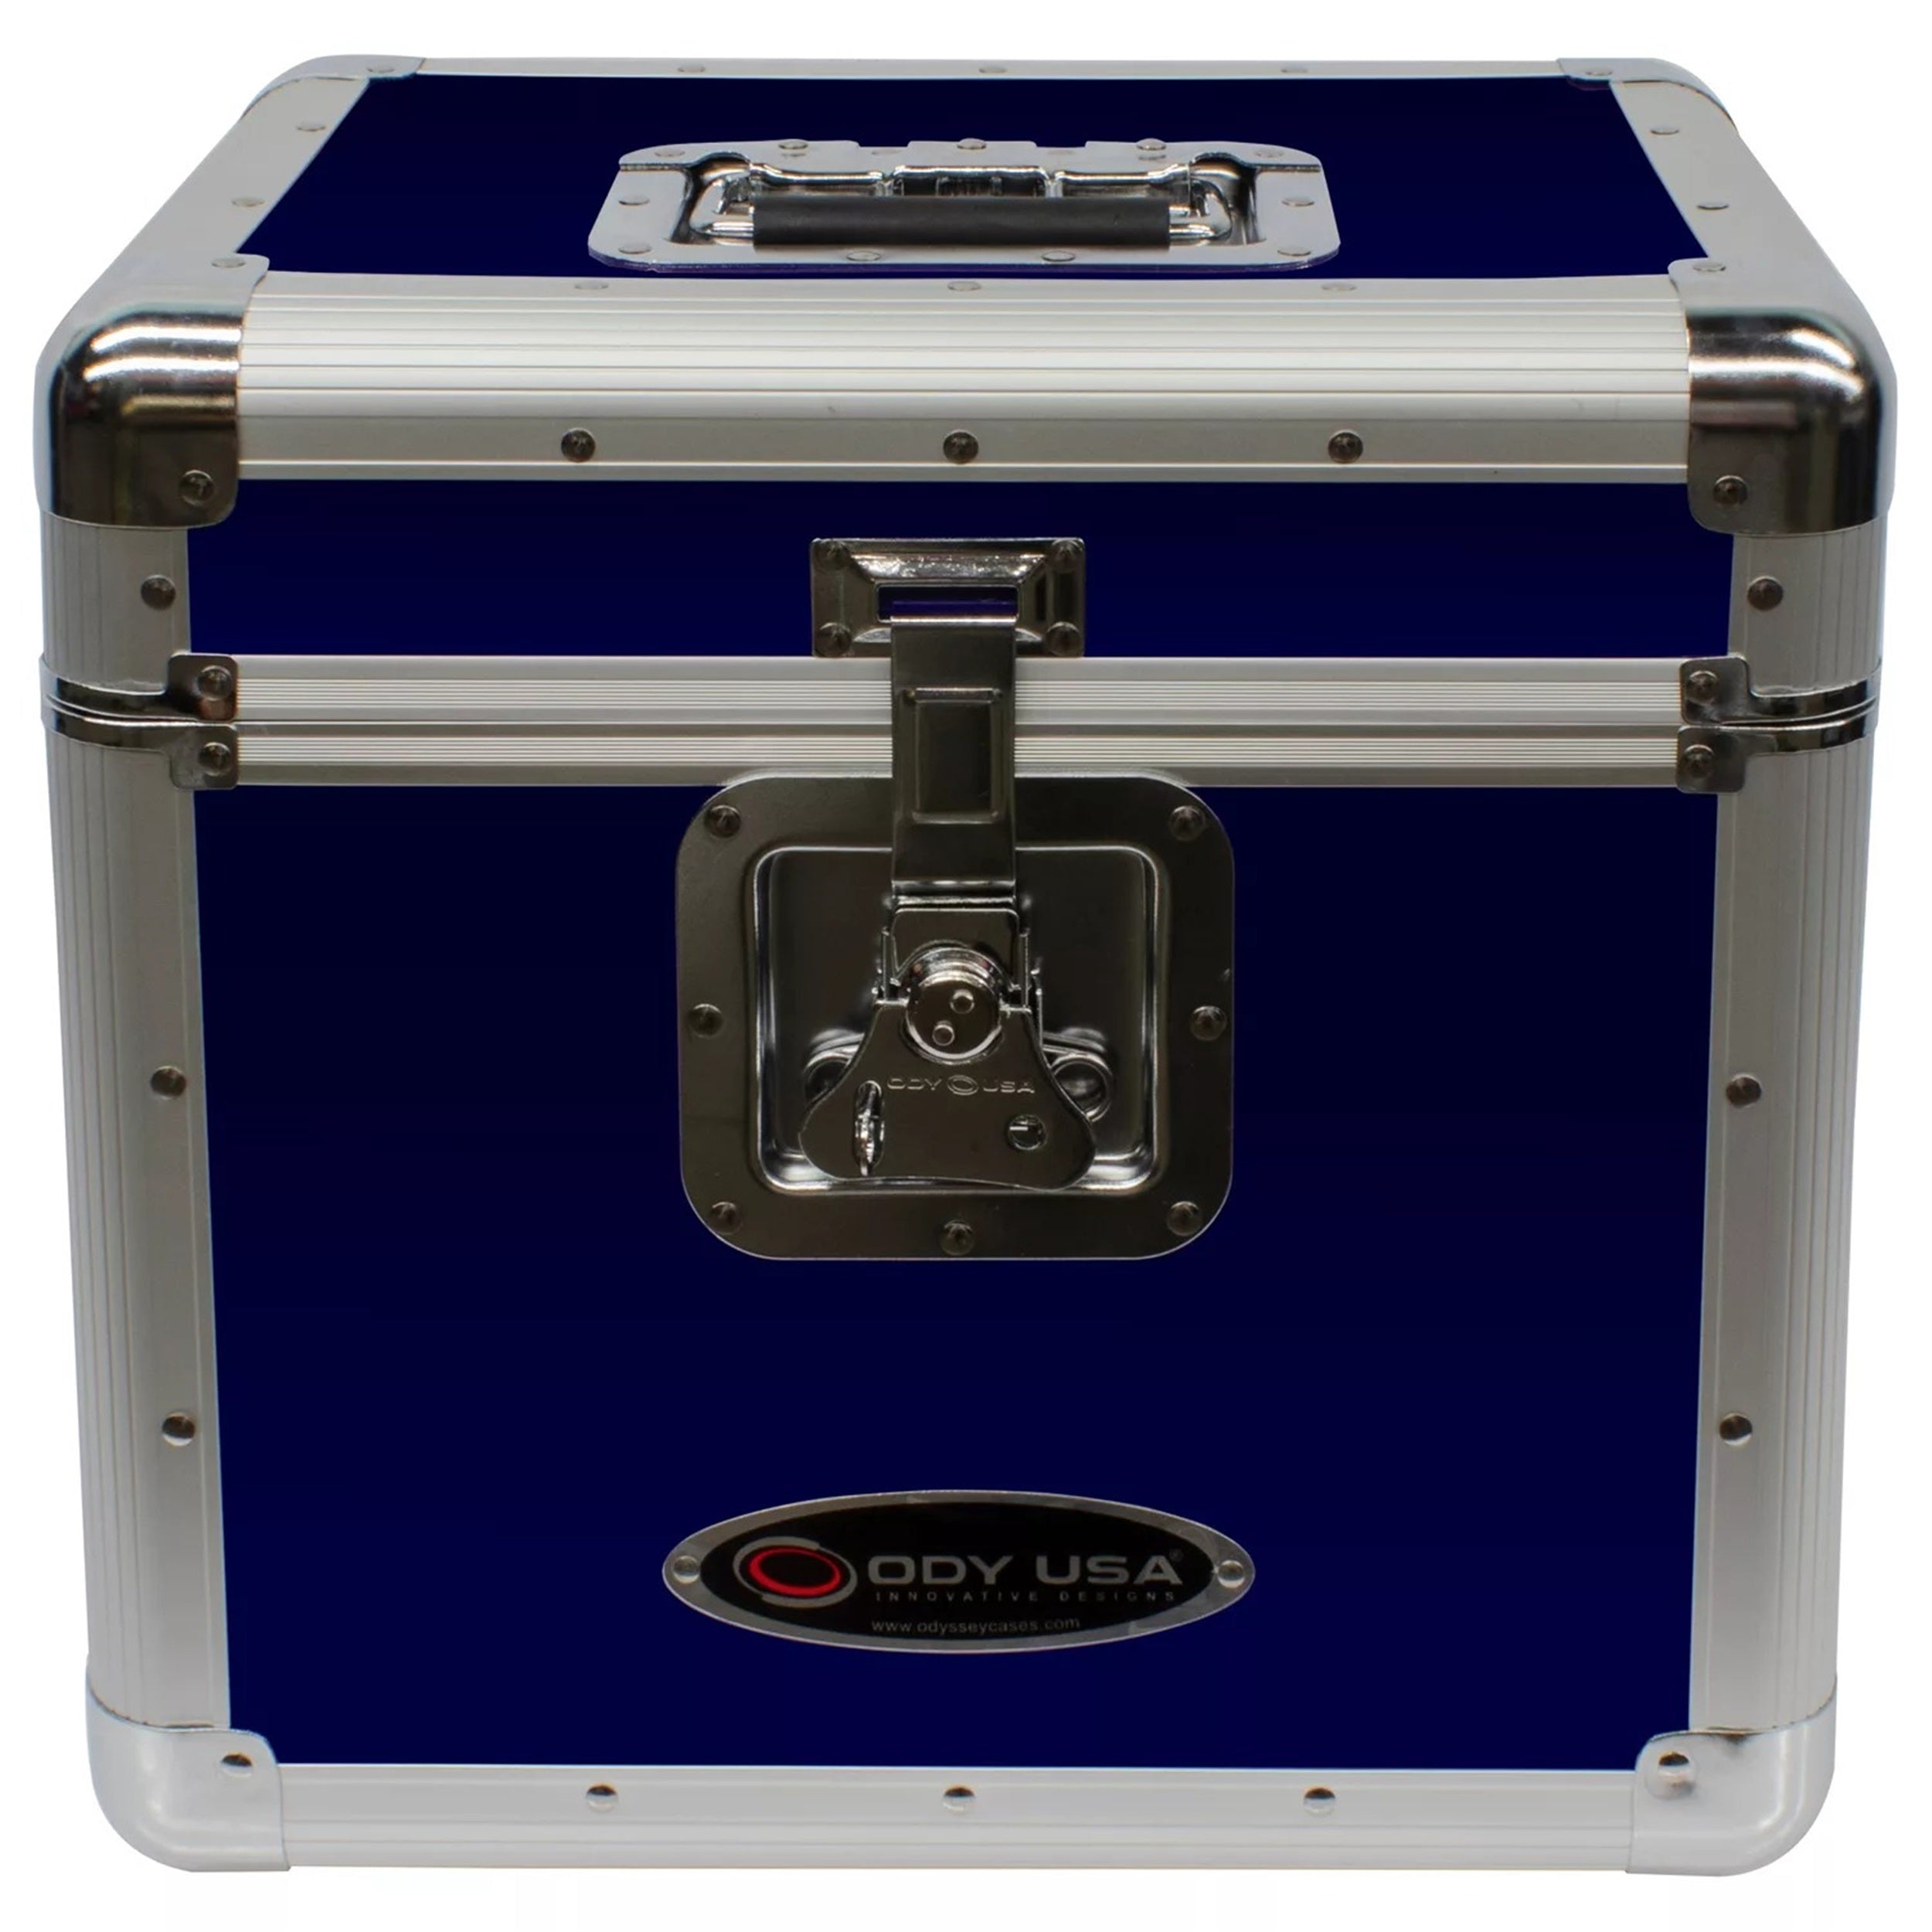 Odyssey KLP2BLU, KROM Series Blue Stackable Record / Utility Case for 70 12in Vinyl Records And LPs by Odyssey